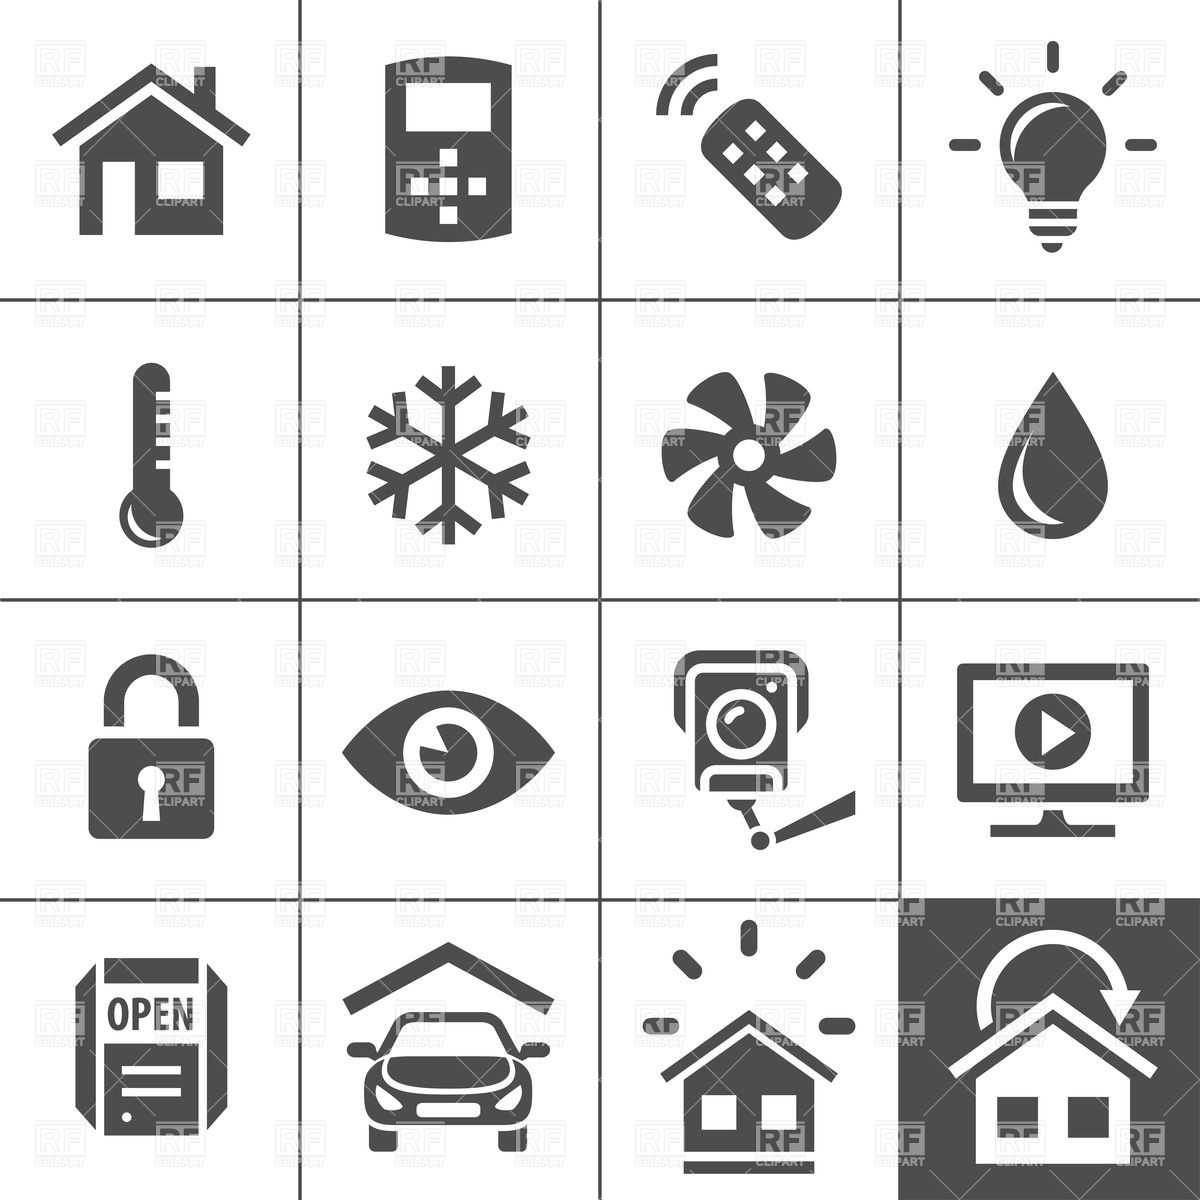 Smart Home And Smart House Icons   Home Automation Control Systems